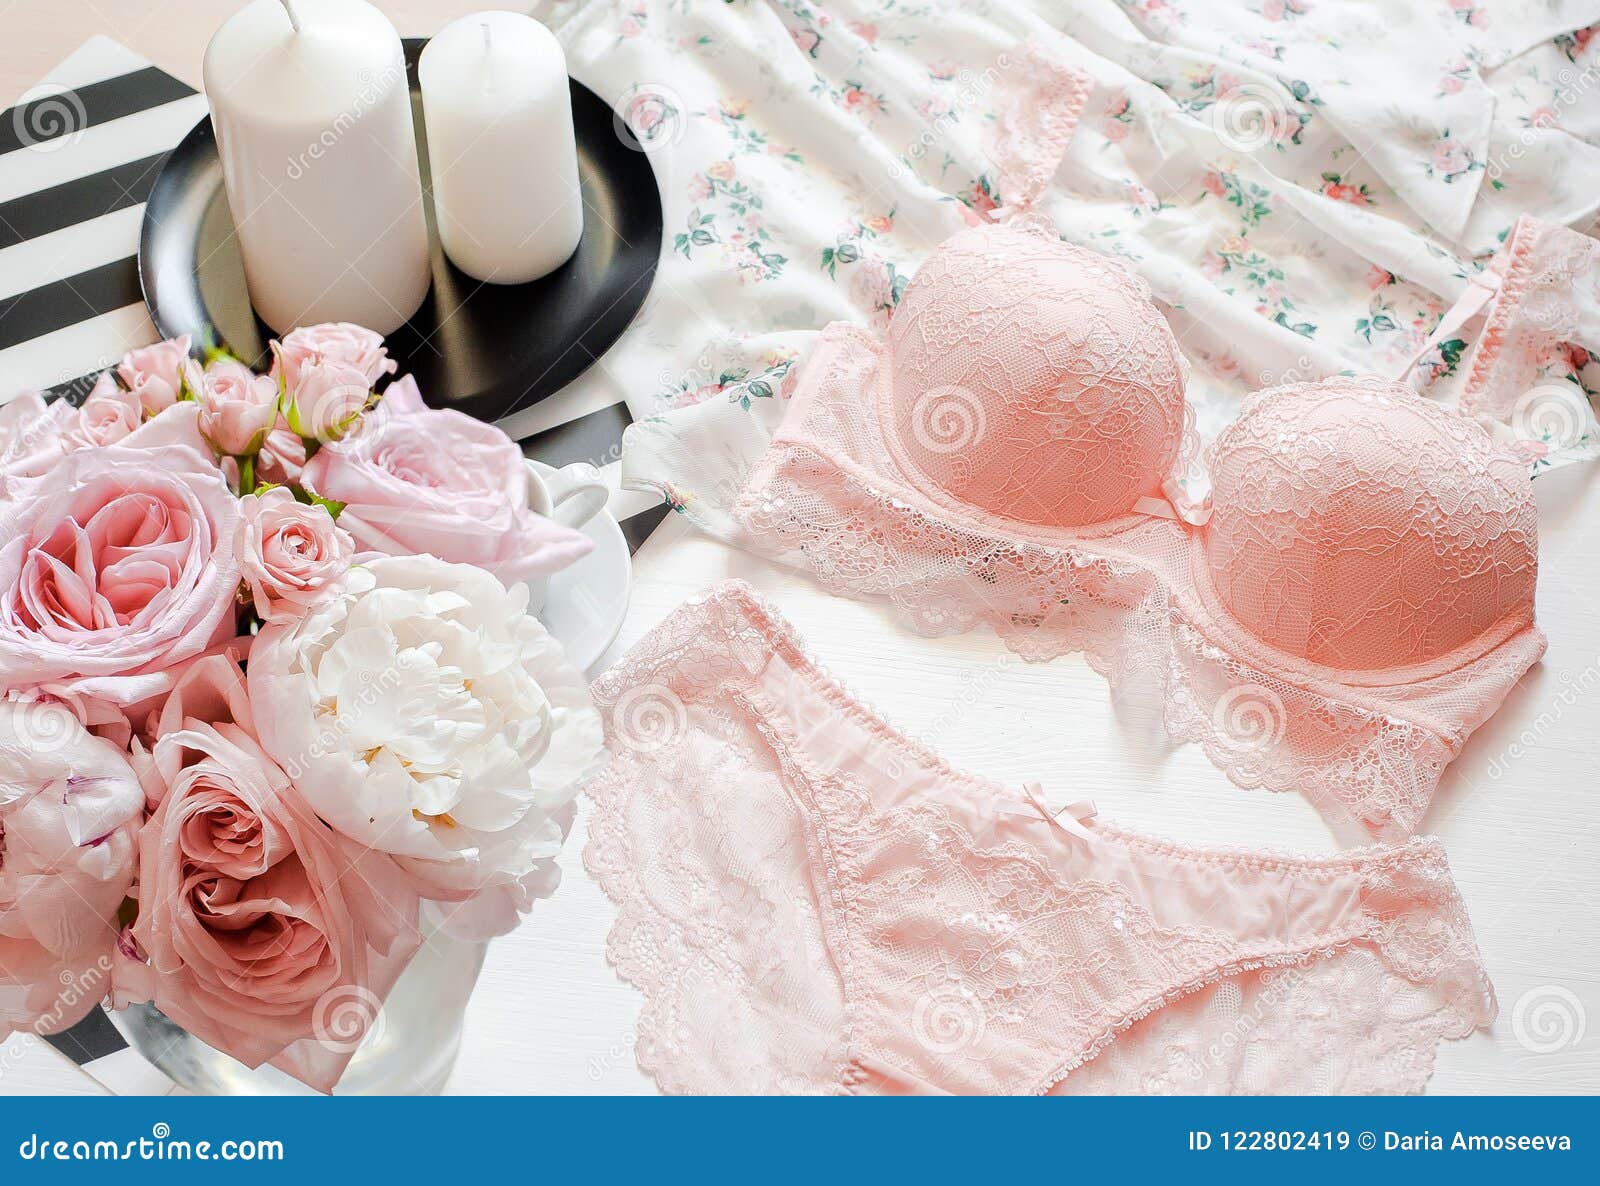 4,112 Pink Lace Lingerie Stock Photos - Free & Royalty-Free Stock Photos  from Dreamstime